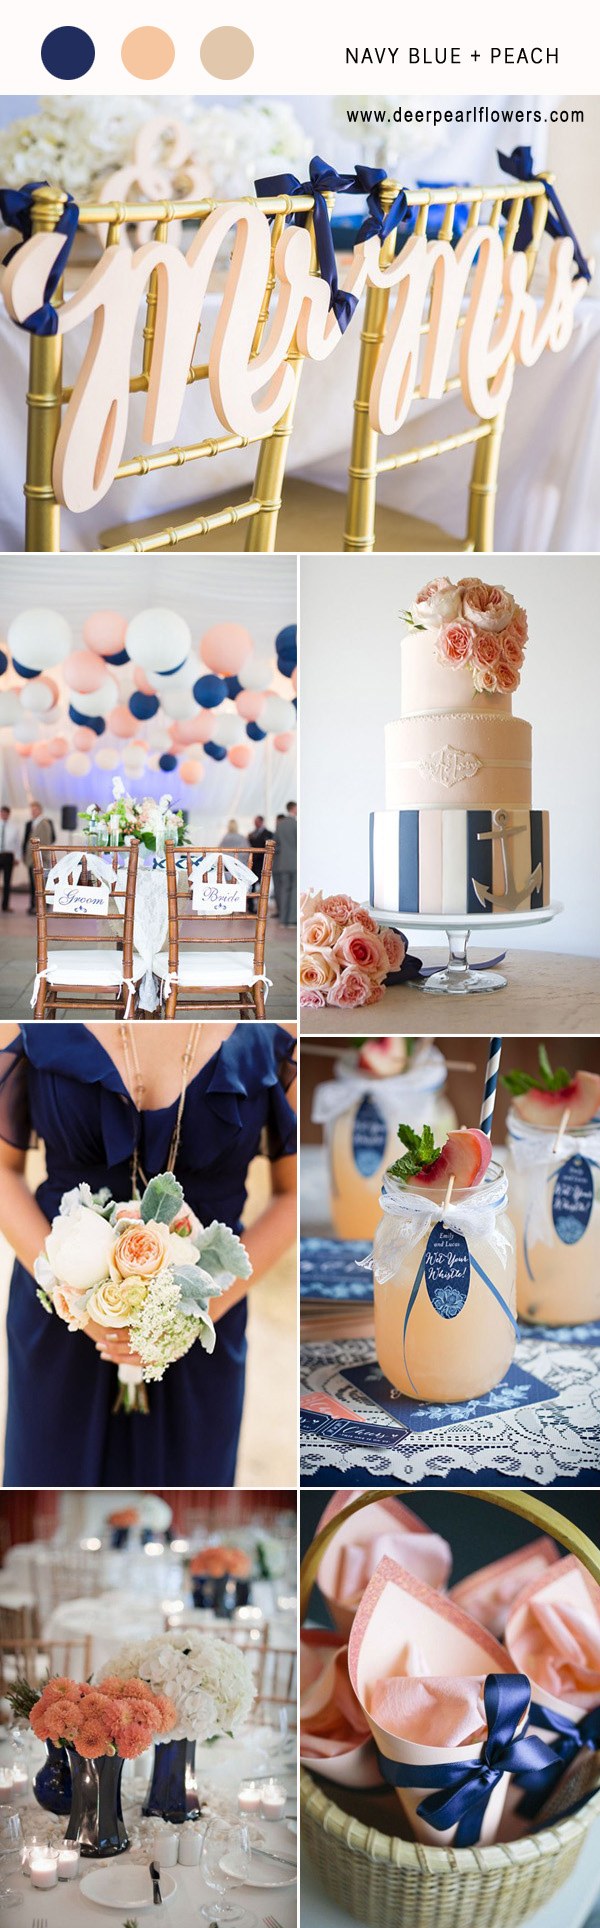 navy blue and light peach wedding color combo ideas for 2018